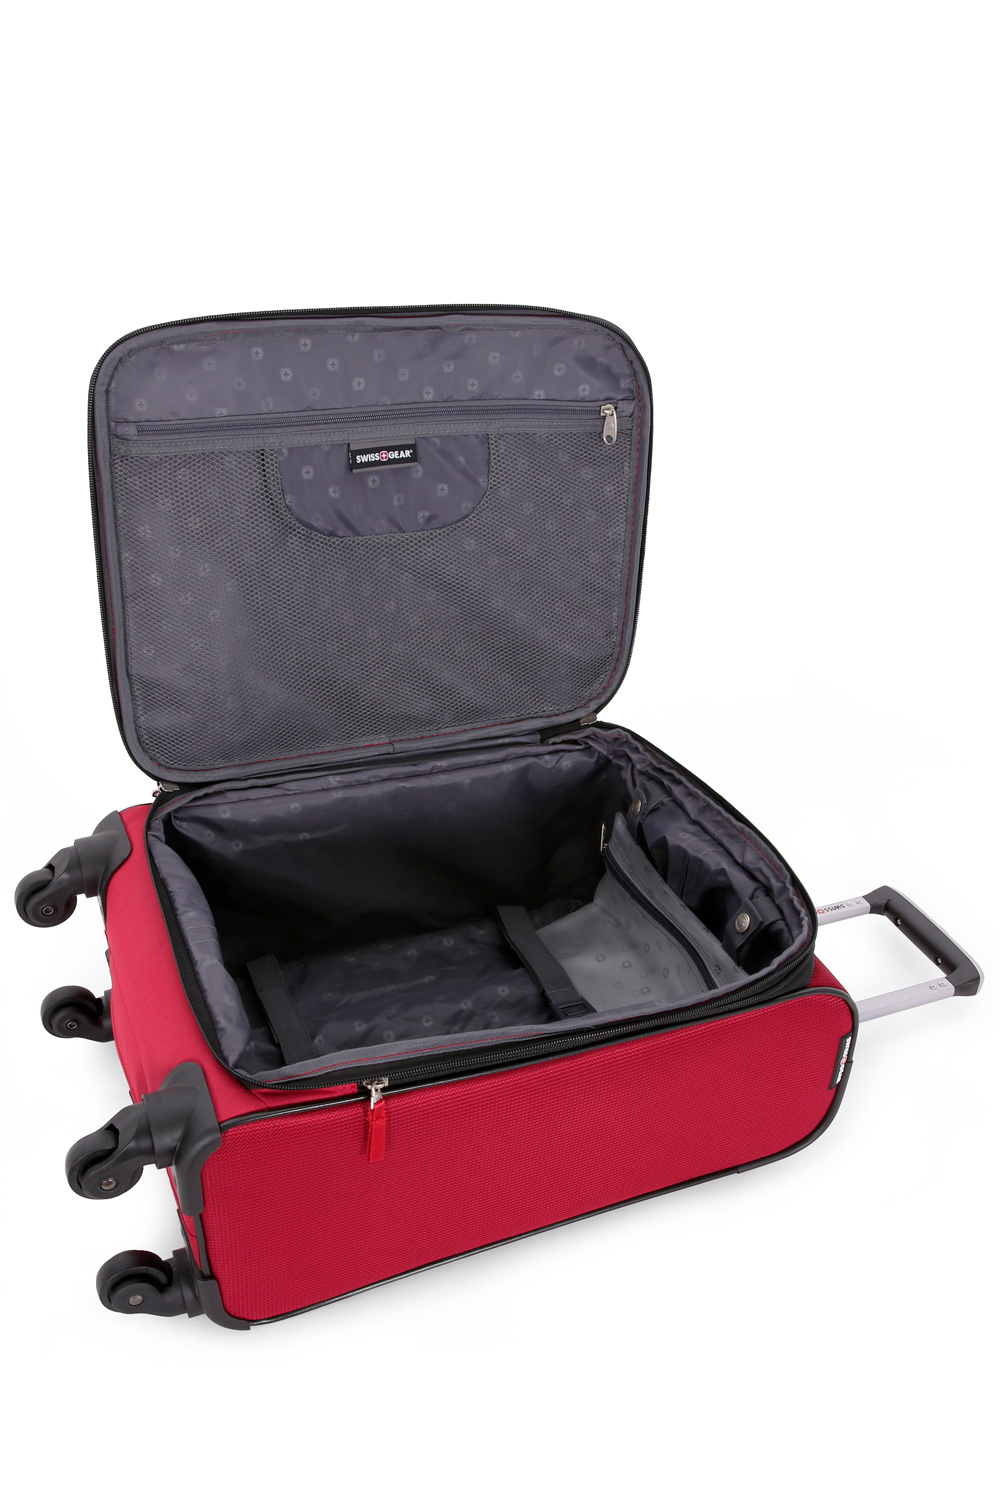 Red Carry-On Spinner Luggage SWISSGEAR Empire Collection 